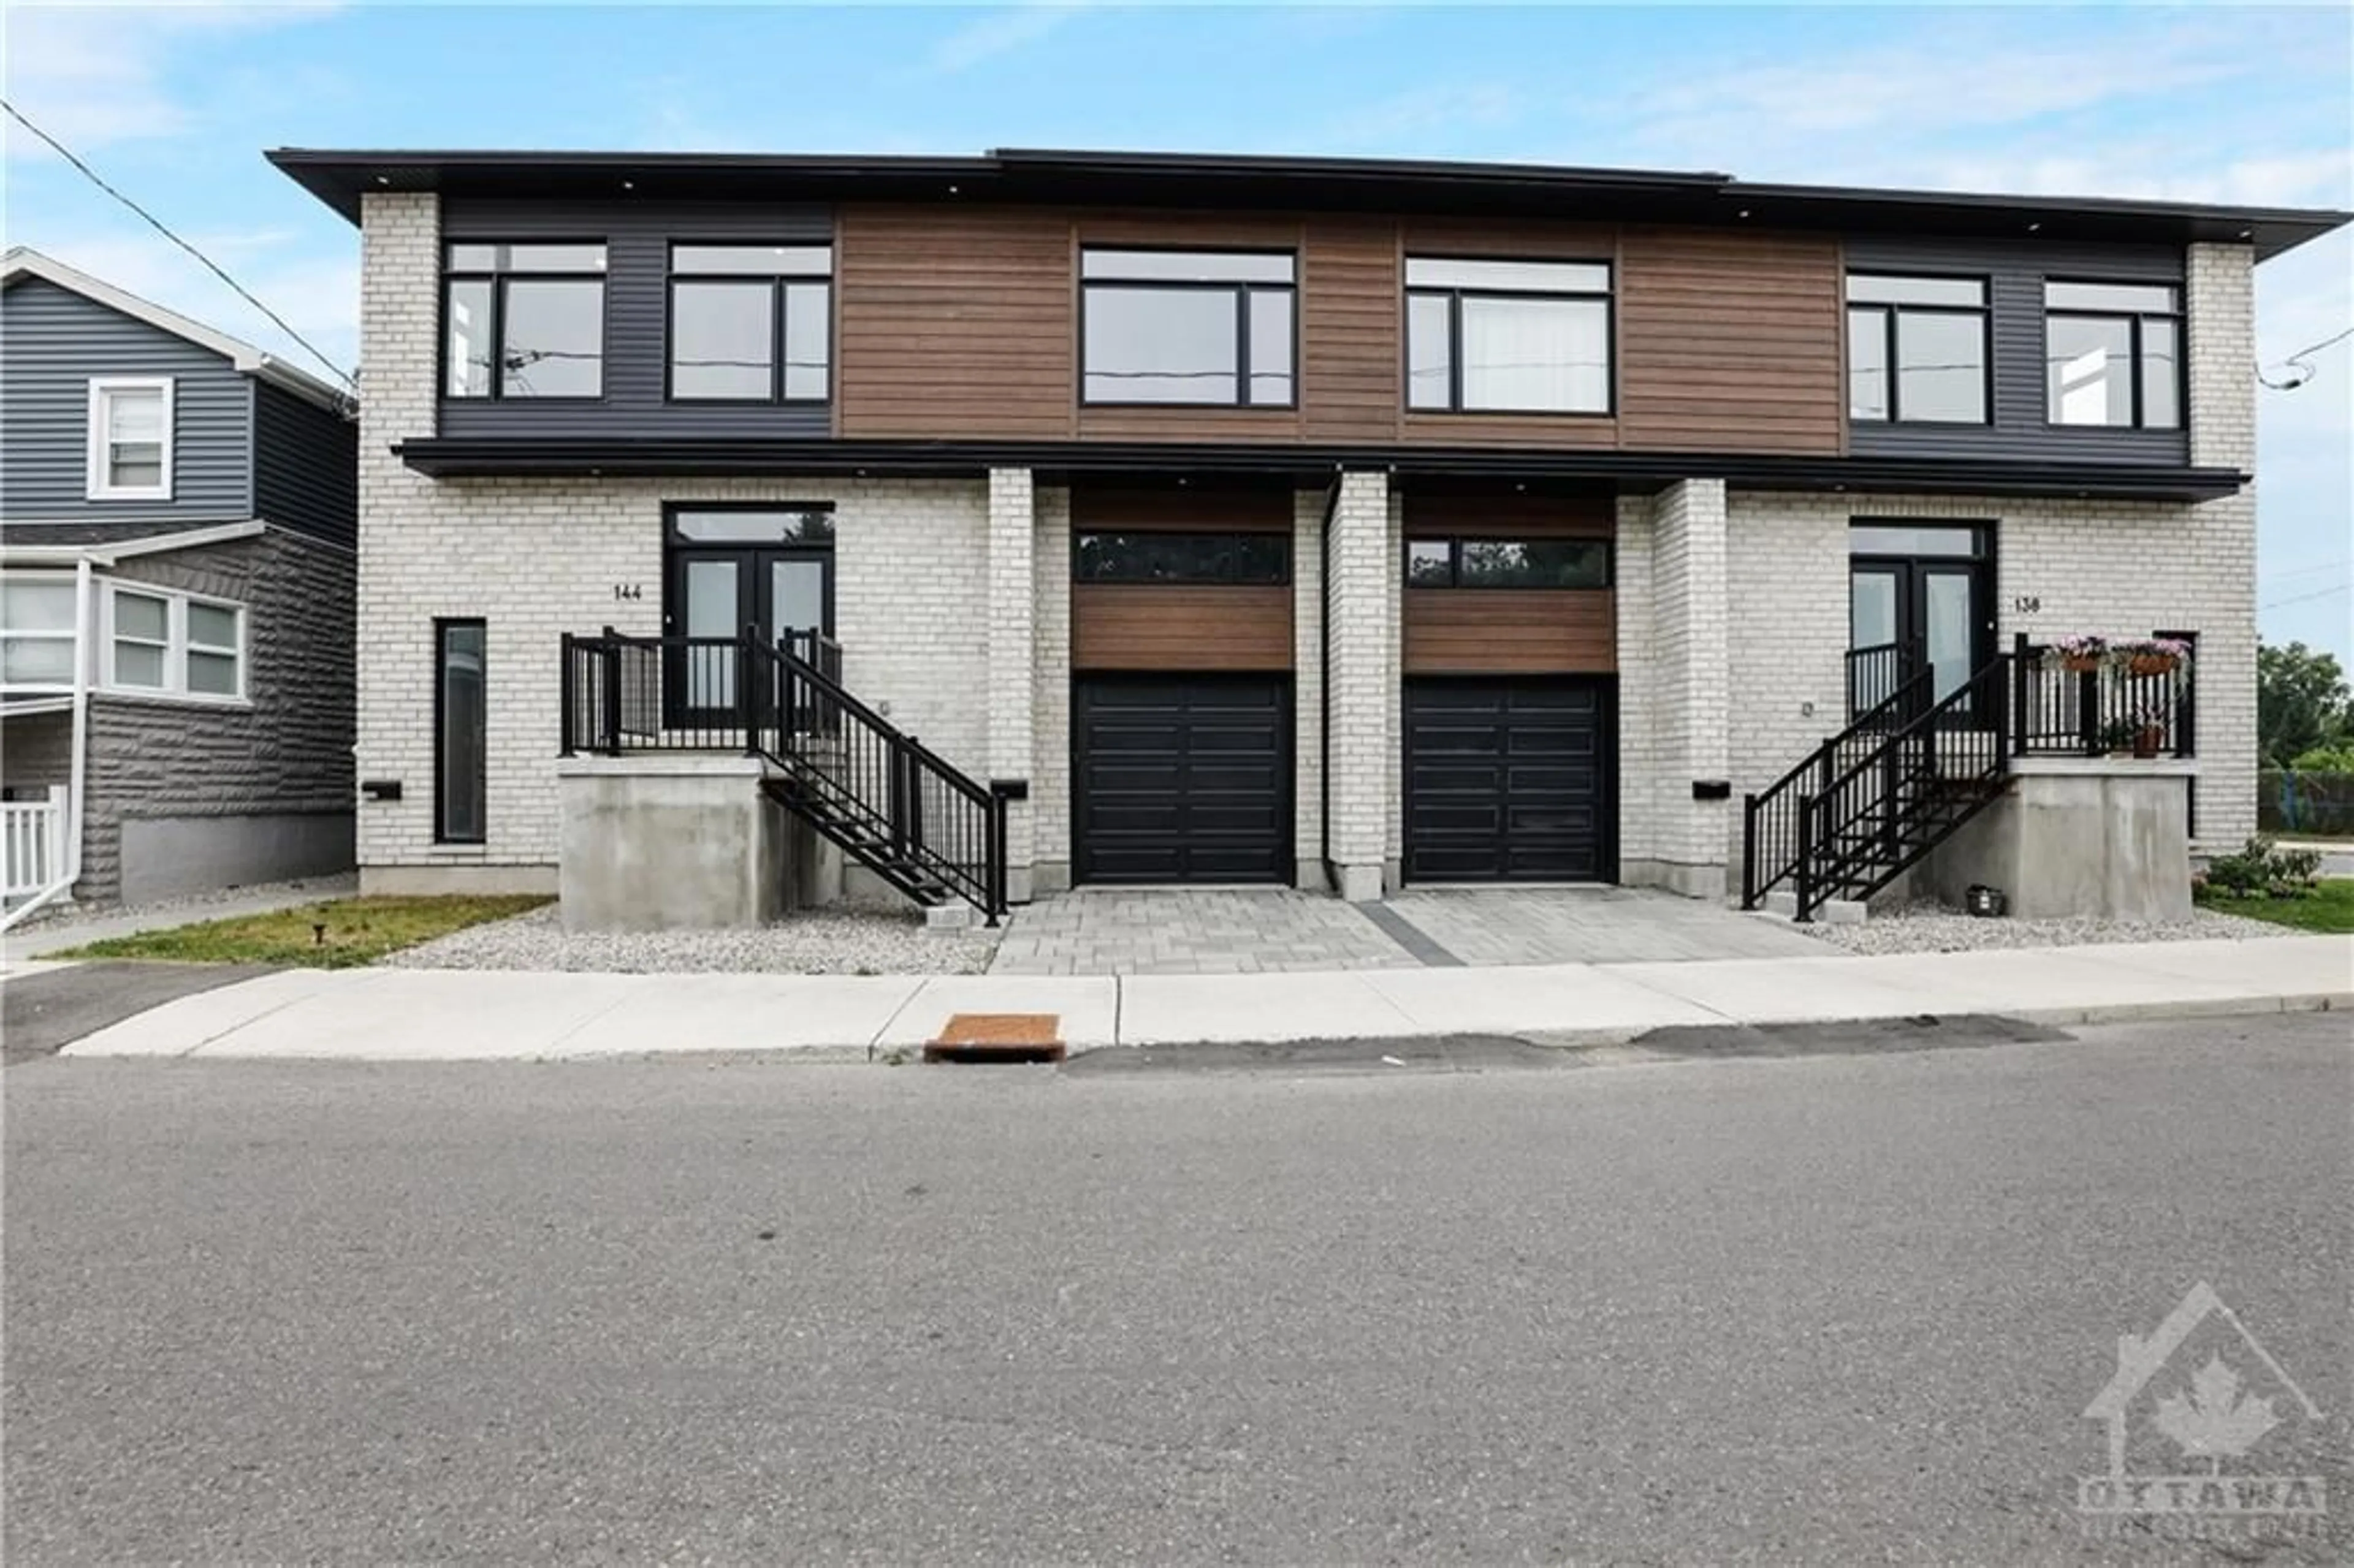 A pic from exterior of the house or condo for 142/144 MONTFORT St, Ottawa Ontario K1L 5P6